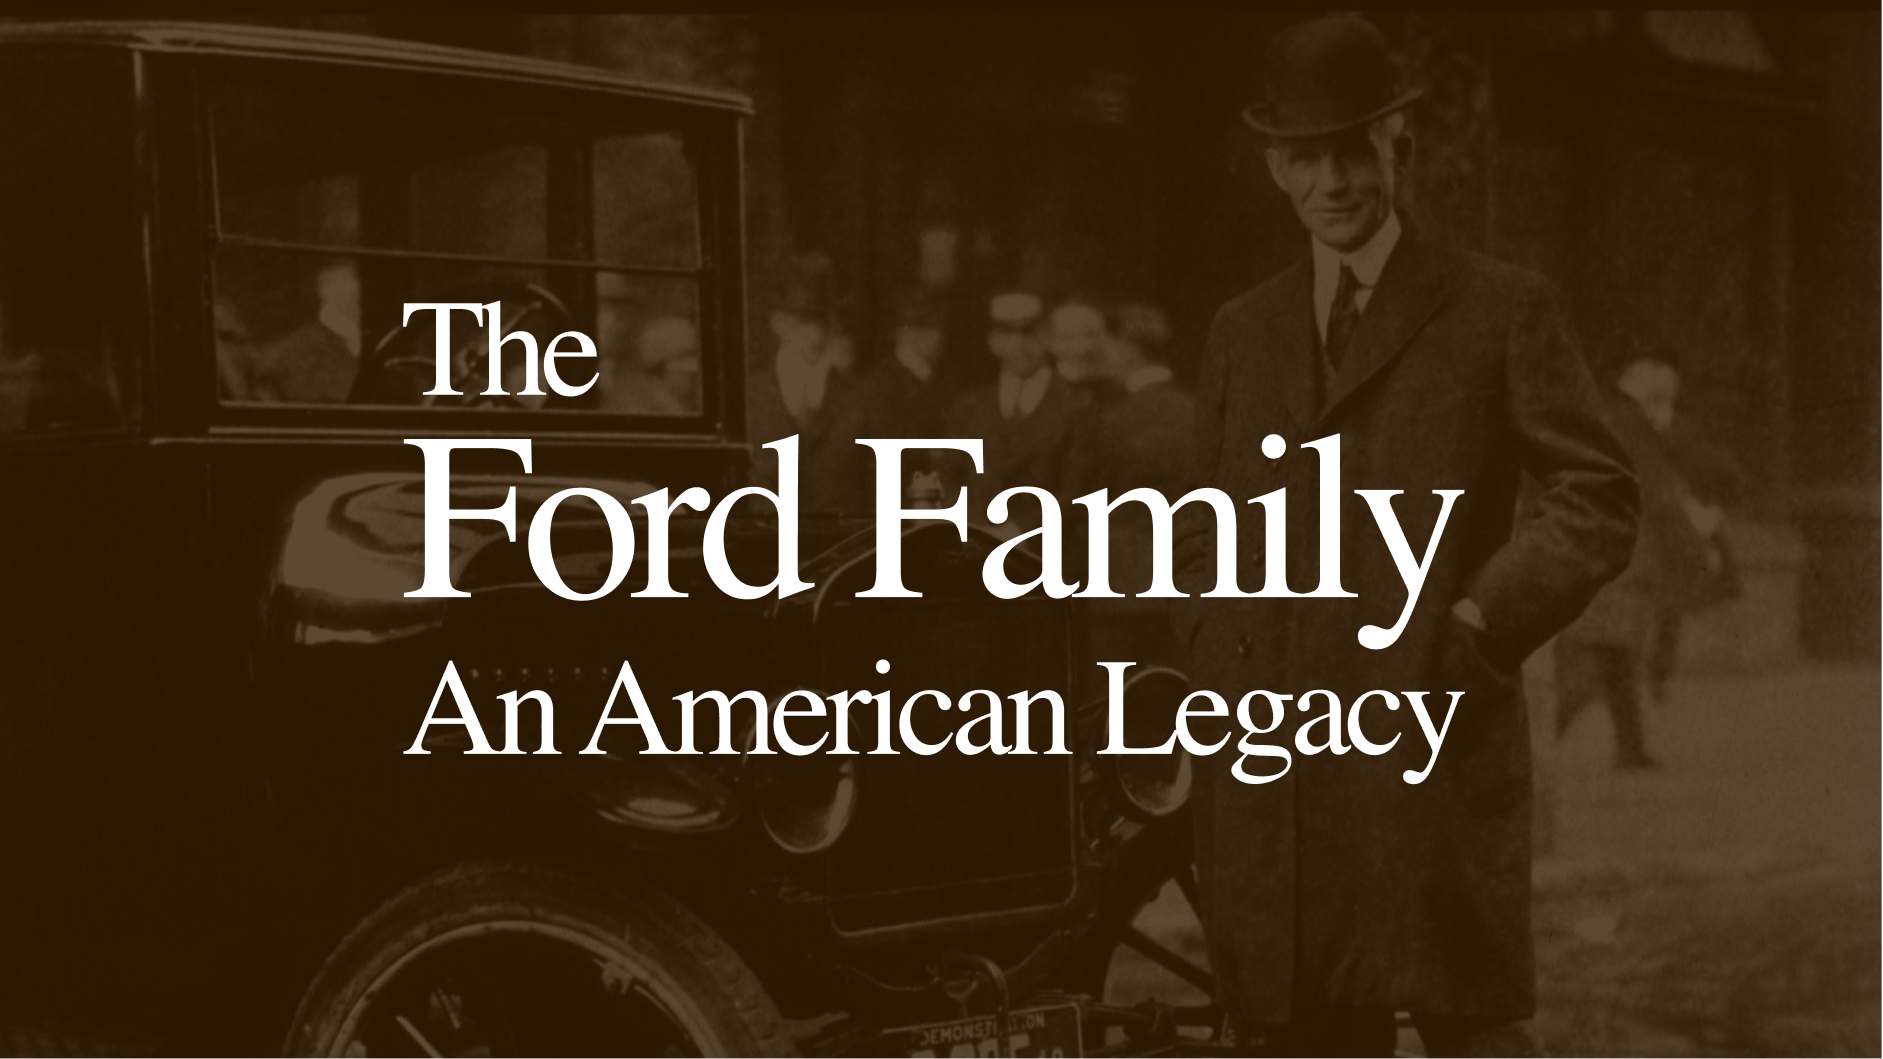 The Ford family